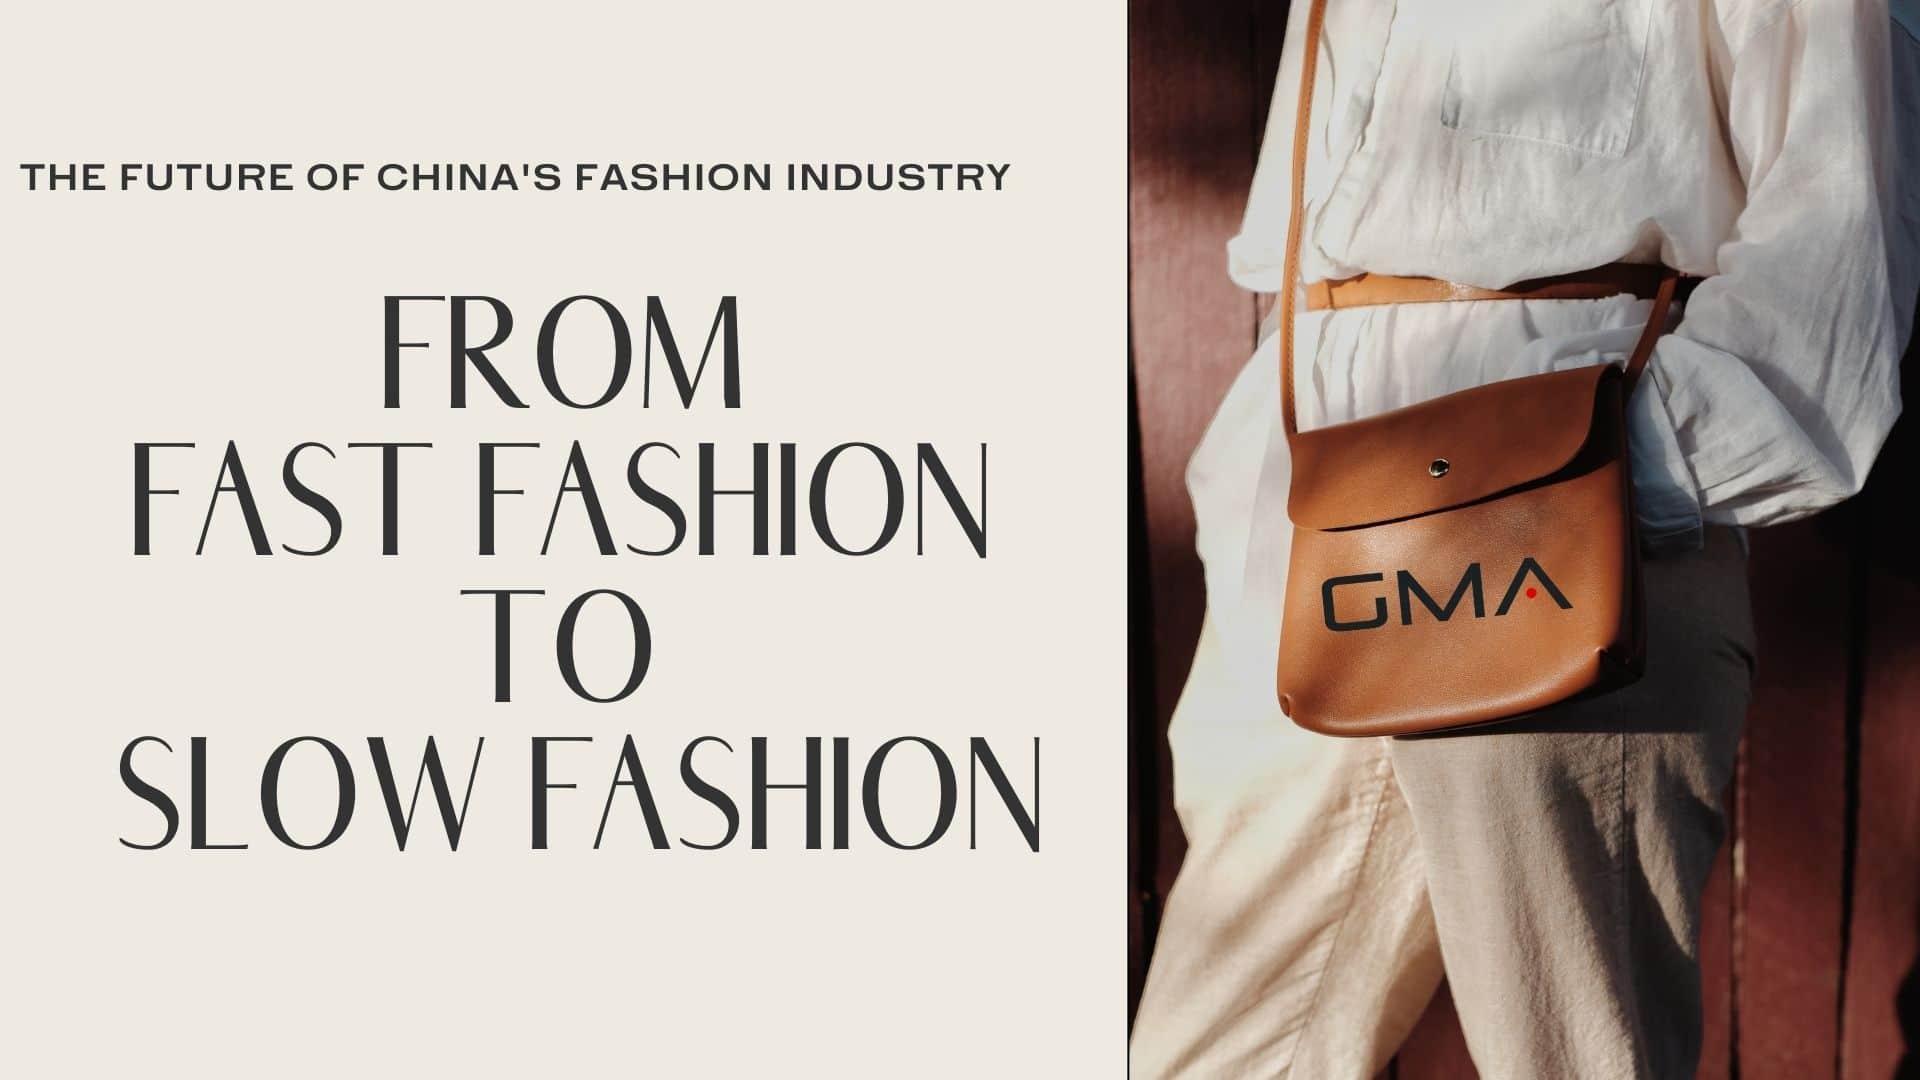 The Future of China's Fashion Industry: From Fast Fashion to Slow Fashion